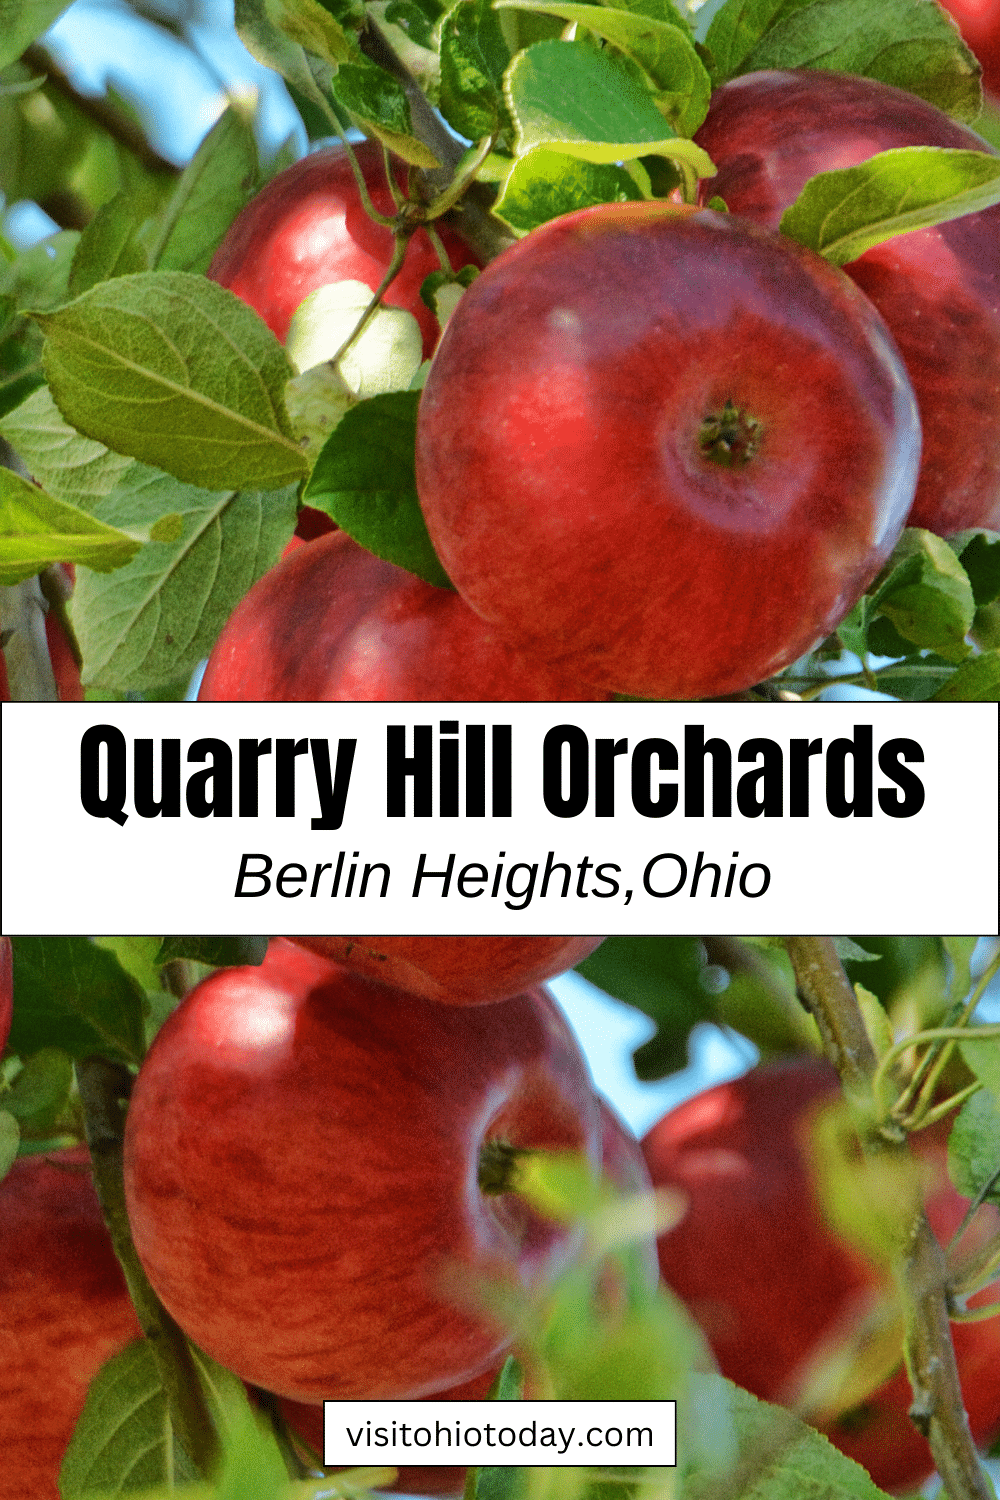 vertical image with a photo of red apples on tree branches. A white strip across the middle has the text Quarry Hill Orchards, Berlin Heights, Ohio. Image via Canva pro license